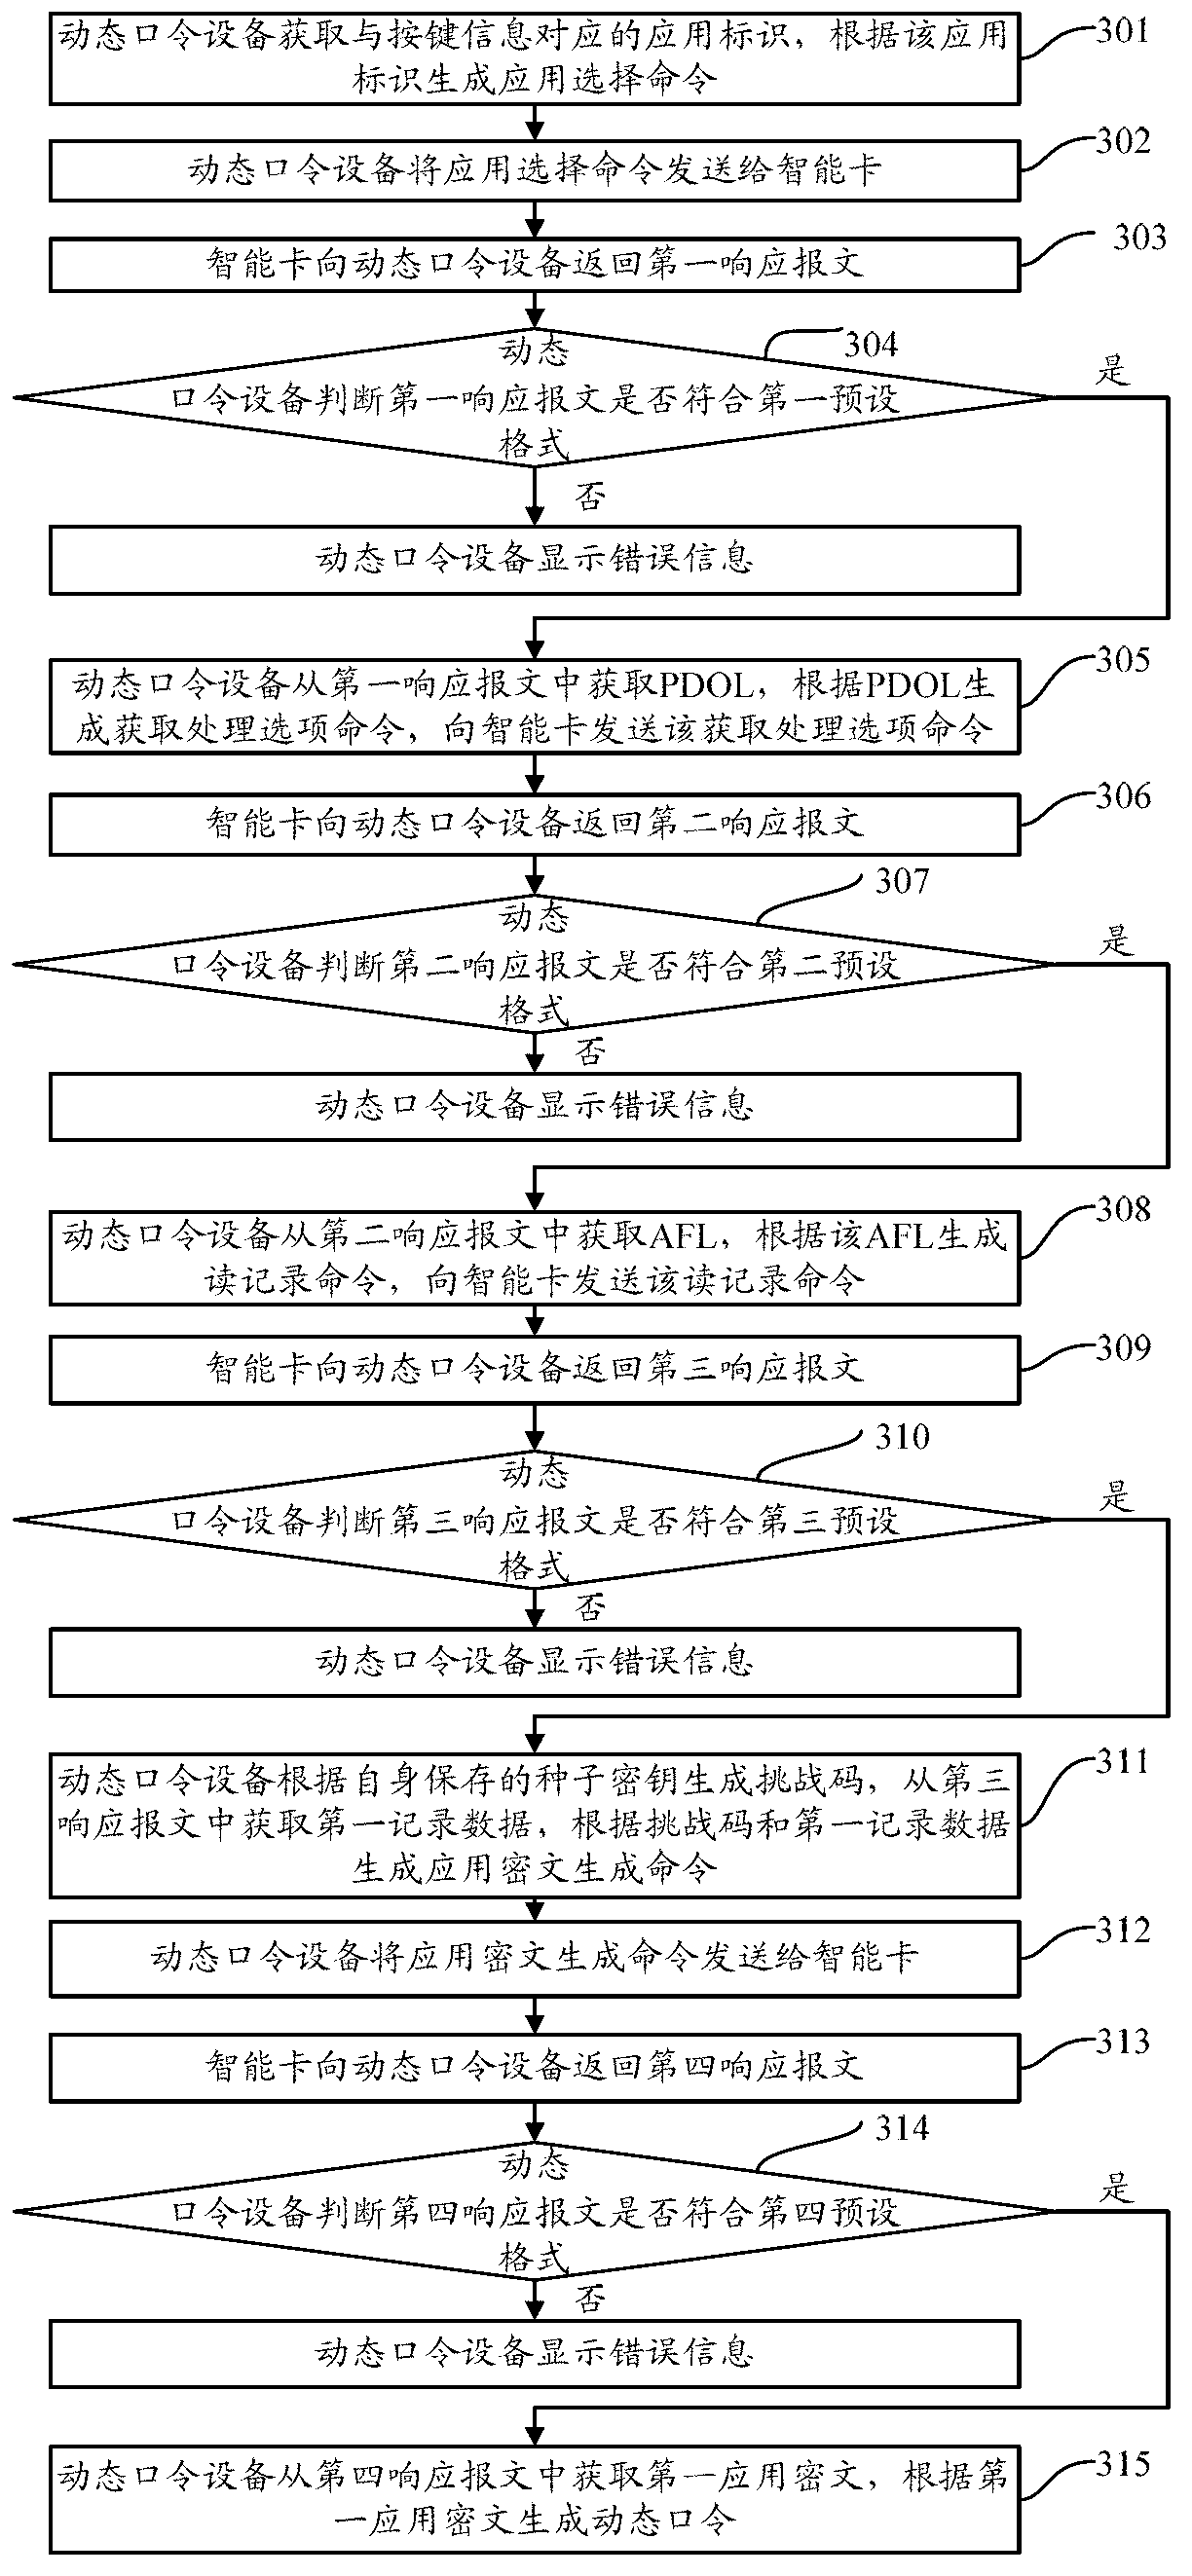 Dynamic password device and working method thereof